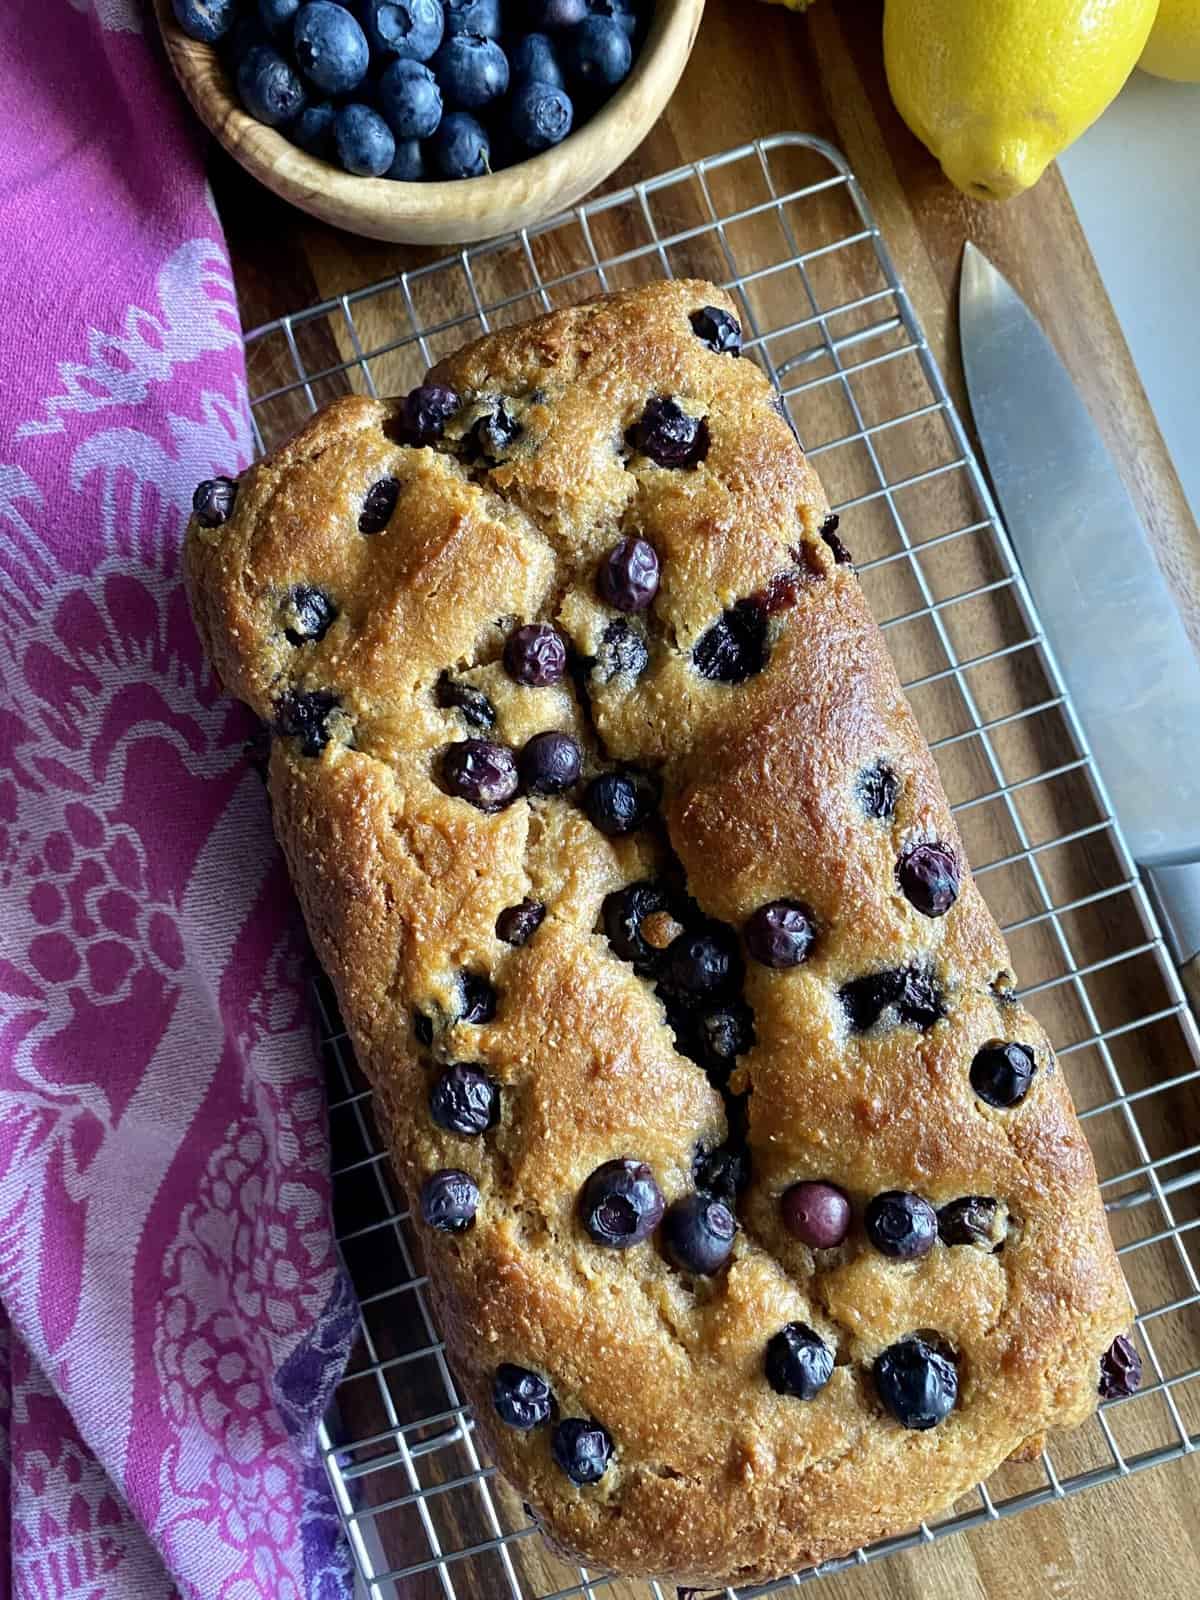 Cream Cheese-Filled Lemon Blueberry Loaf - Del's cooking twist